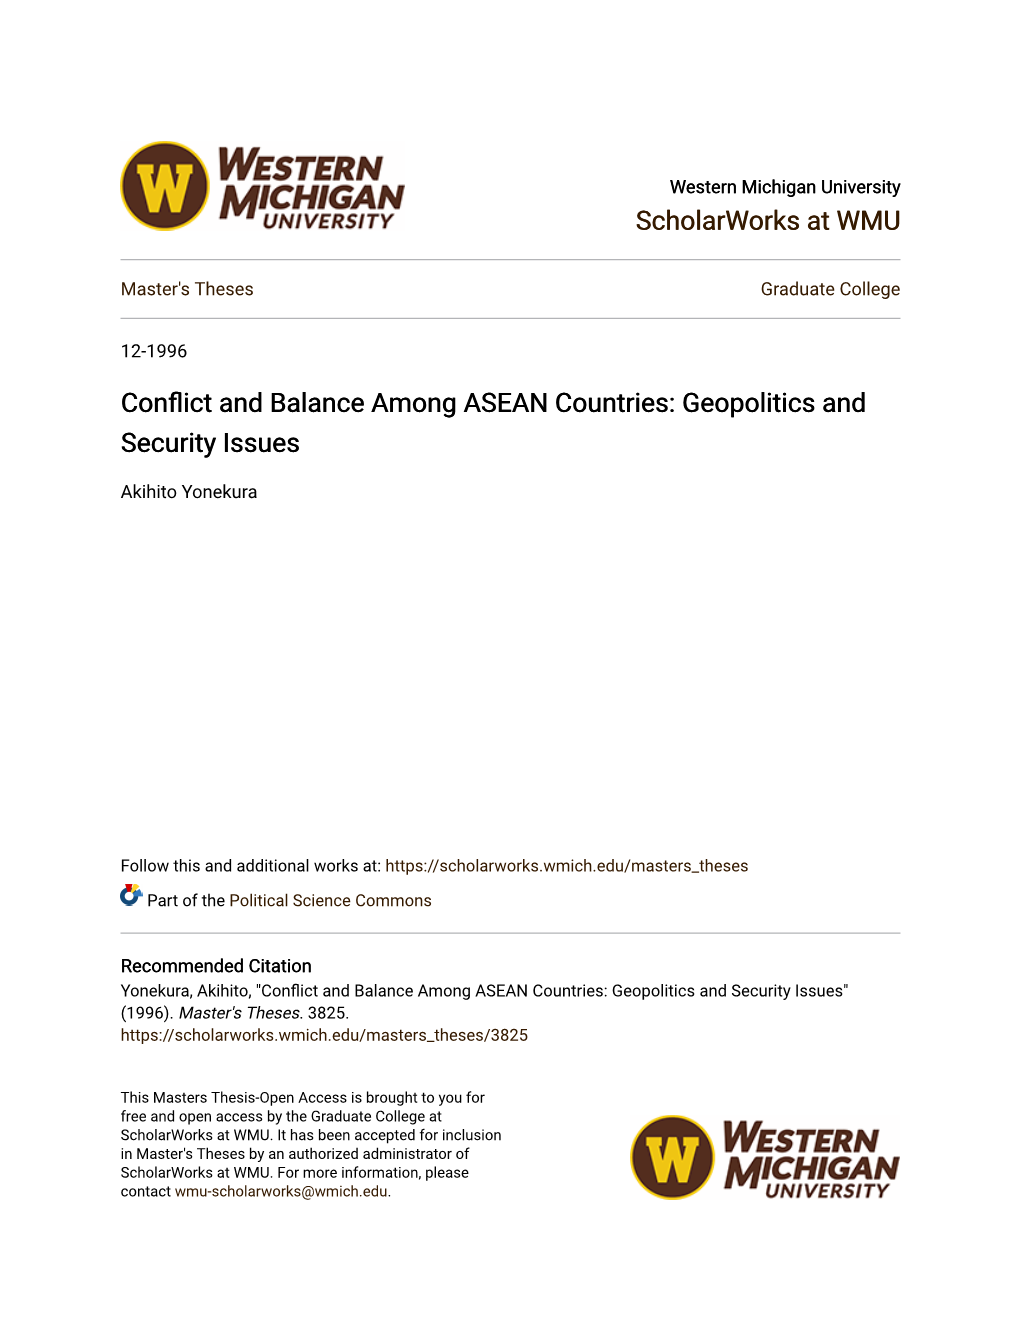 Conflict and Balance Among ASEAN Countries: Geopolitics and Security Issues